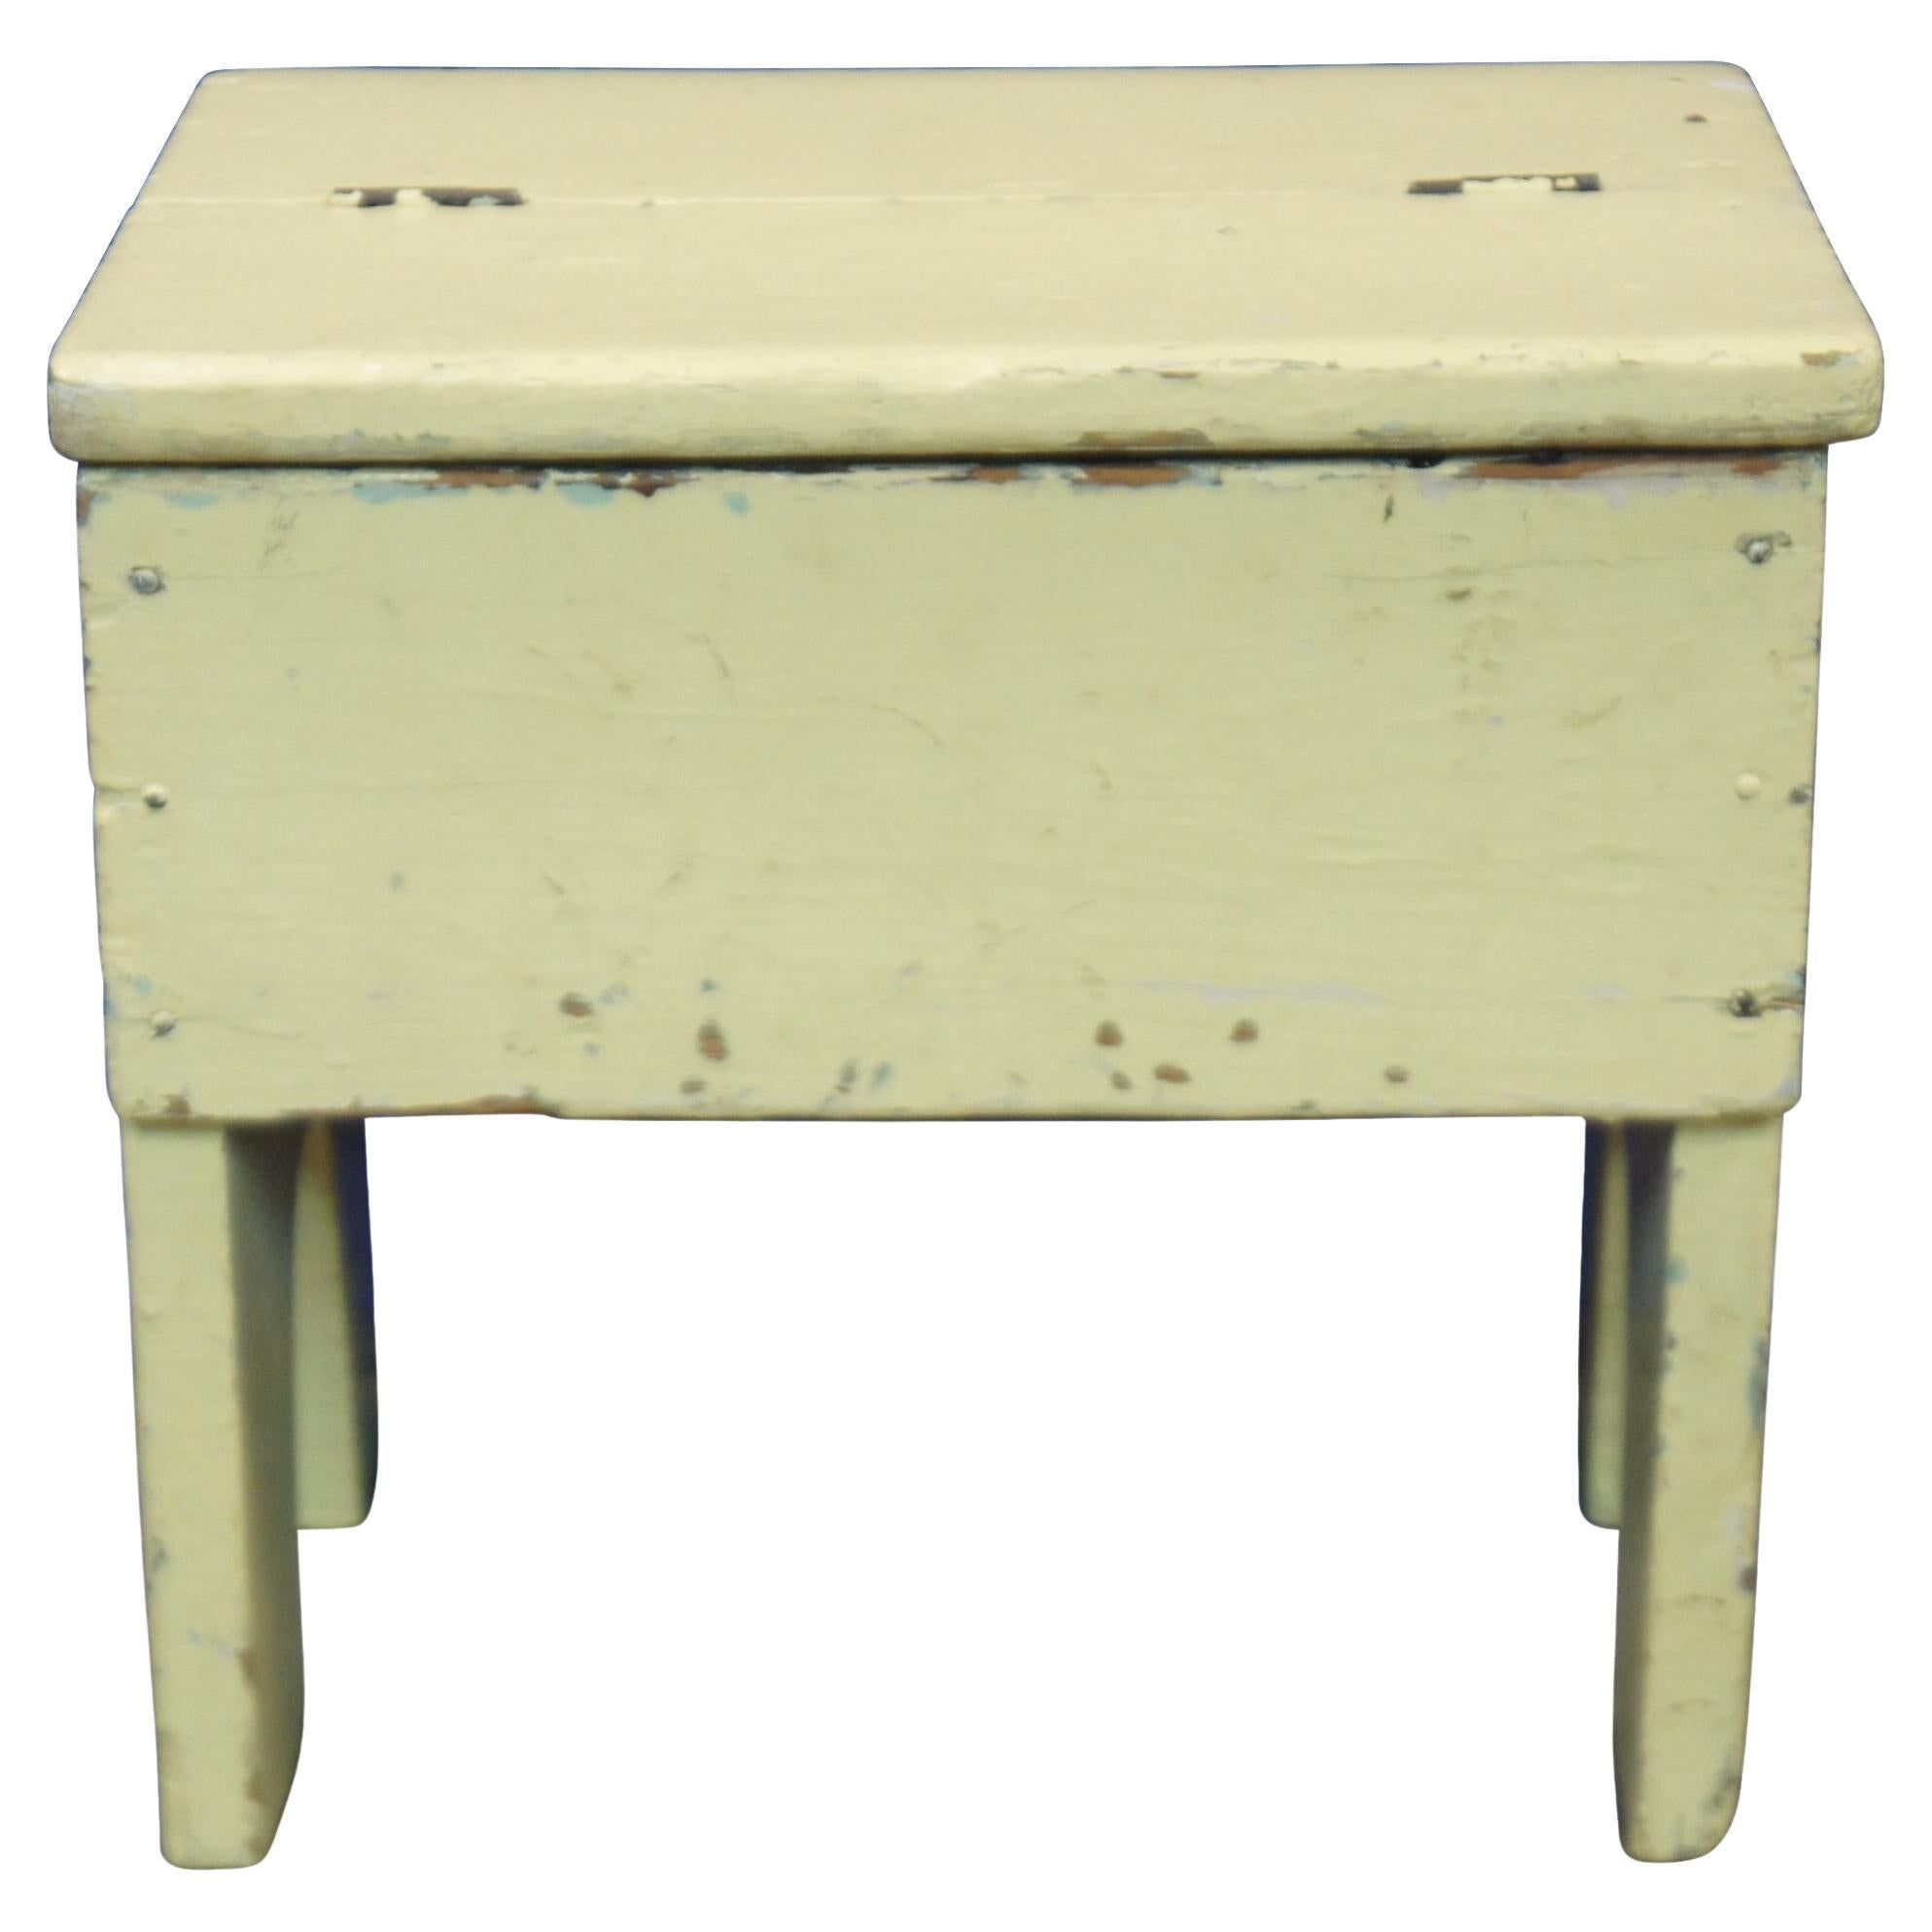 Antique wooden shoe shine box or step stool painted in pale yellow gloss.
 